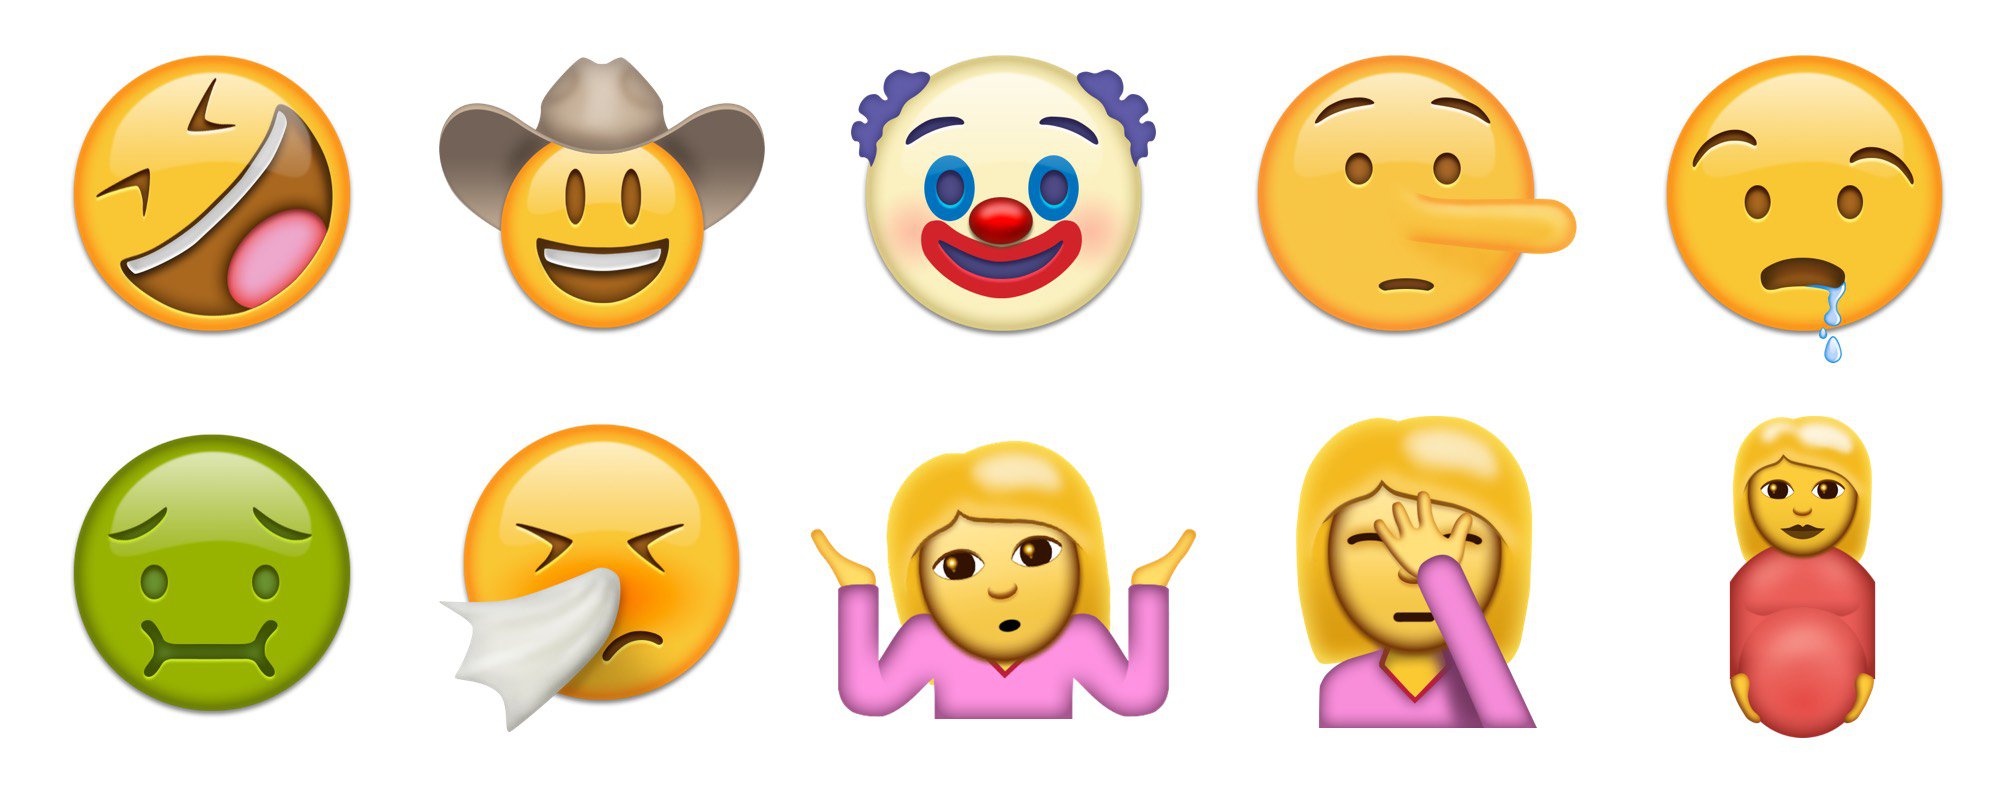 Unicode releases 72 more new Emojis that are likely to reach iOS 10 and macOS Sierra